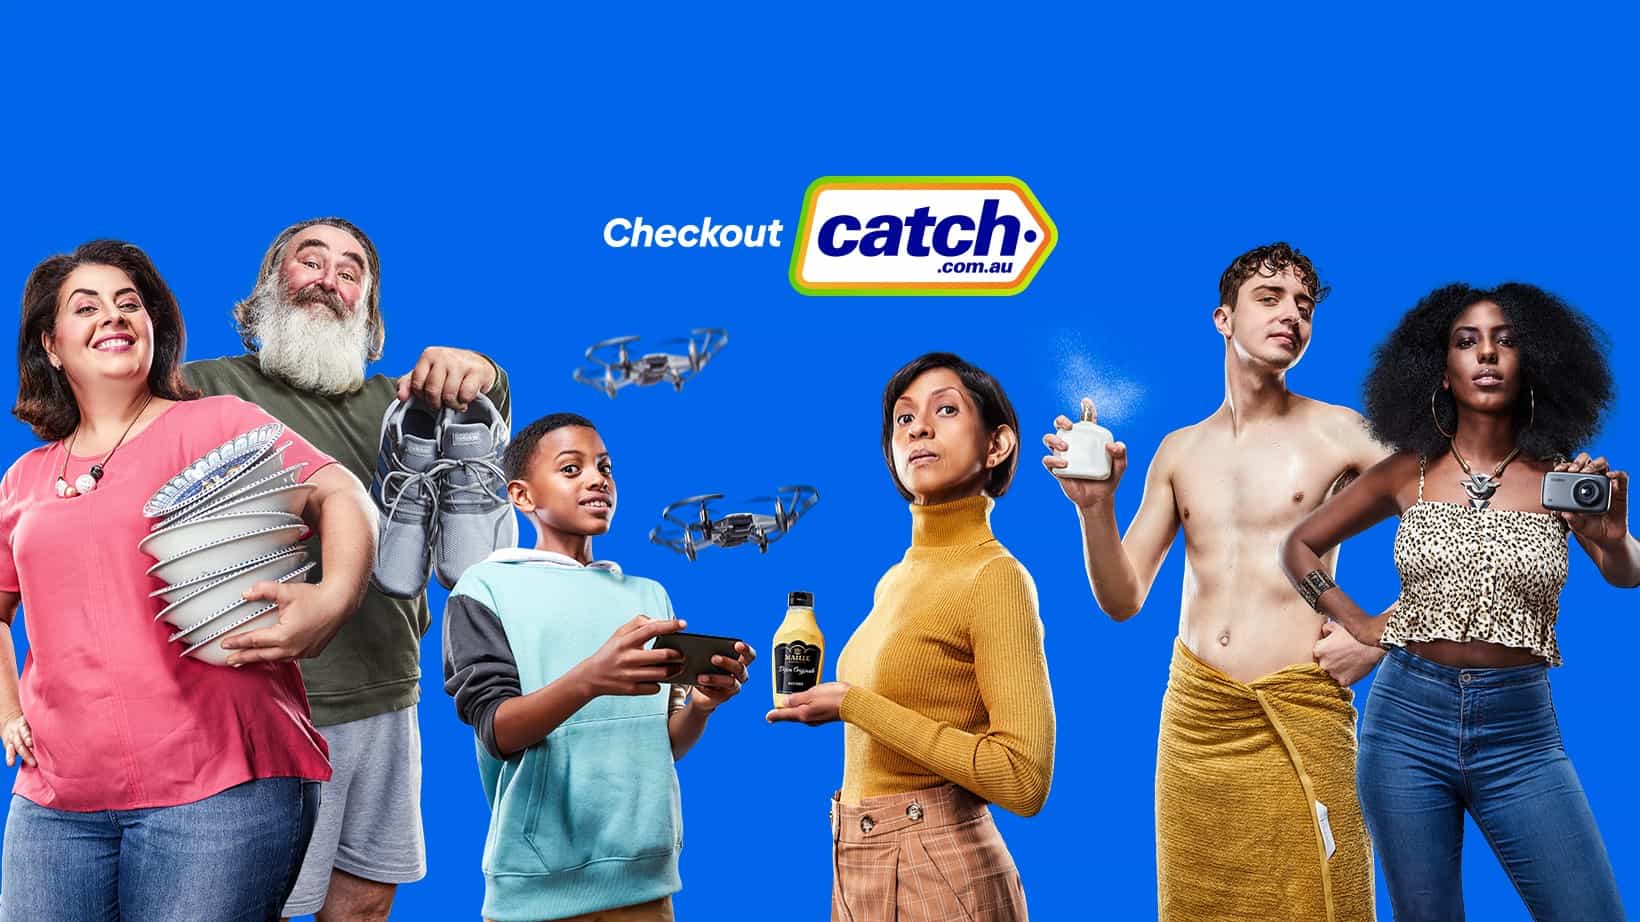 20-40% OFF on apparel, footwear, accessories and electronics at Catch